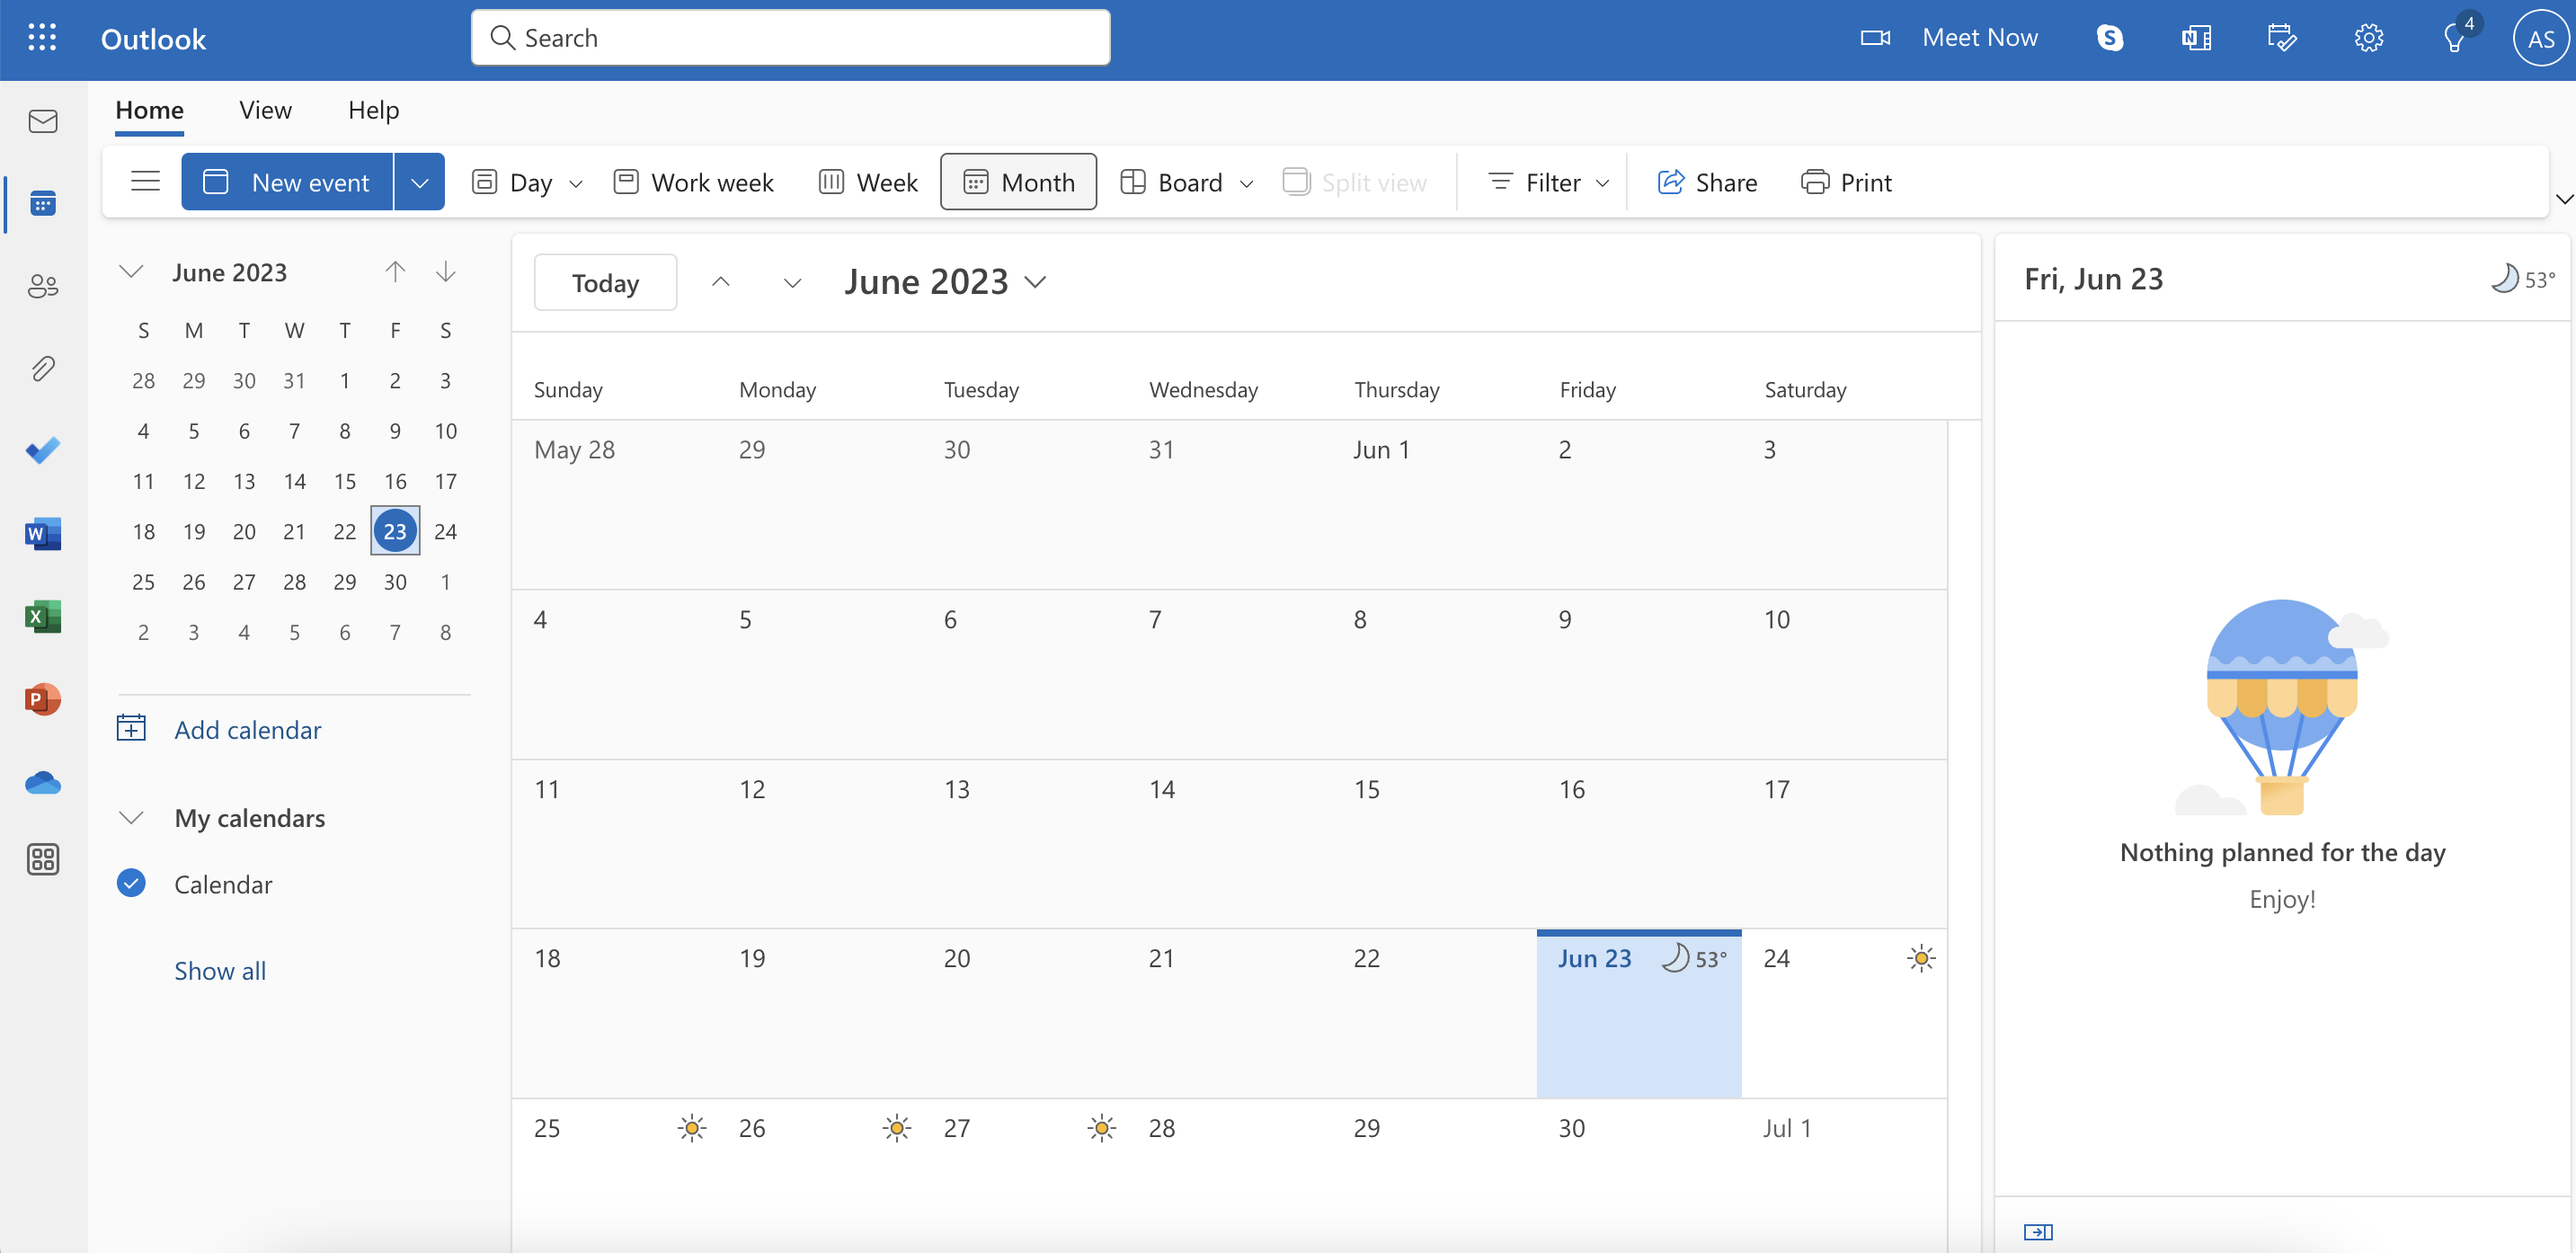 Maximize your day get Productive with Outlook Calendar